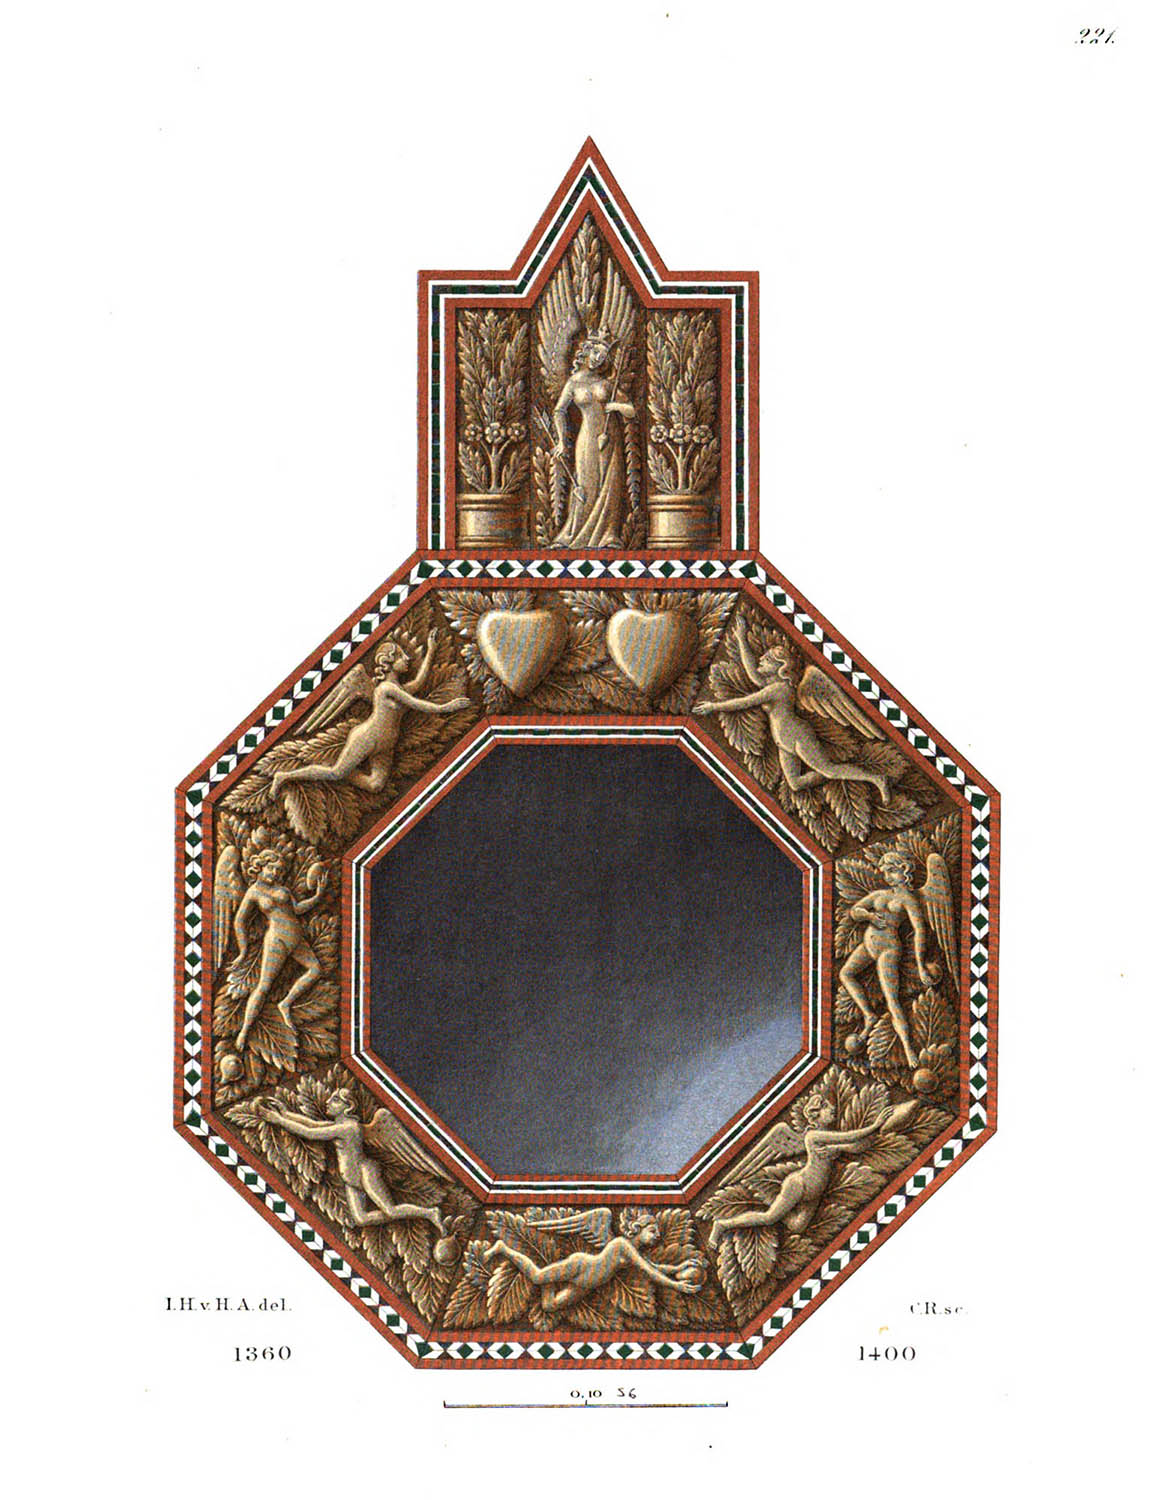 An engraving of a mirror with a bone frame carved with several winged figures.